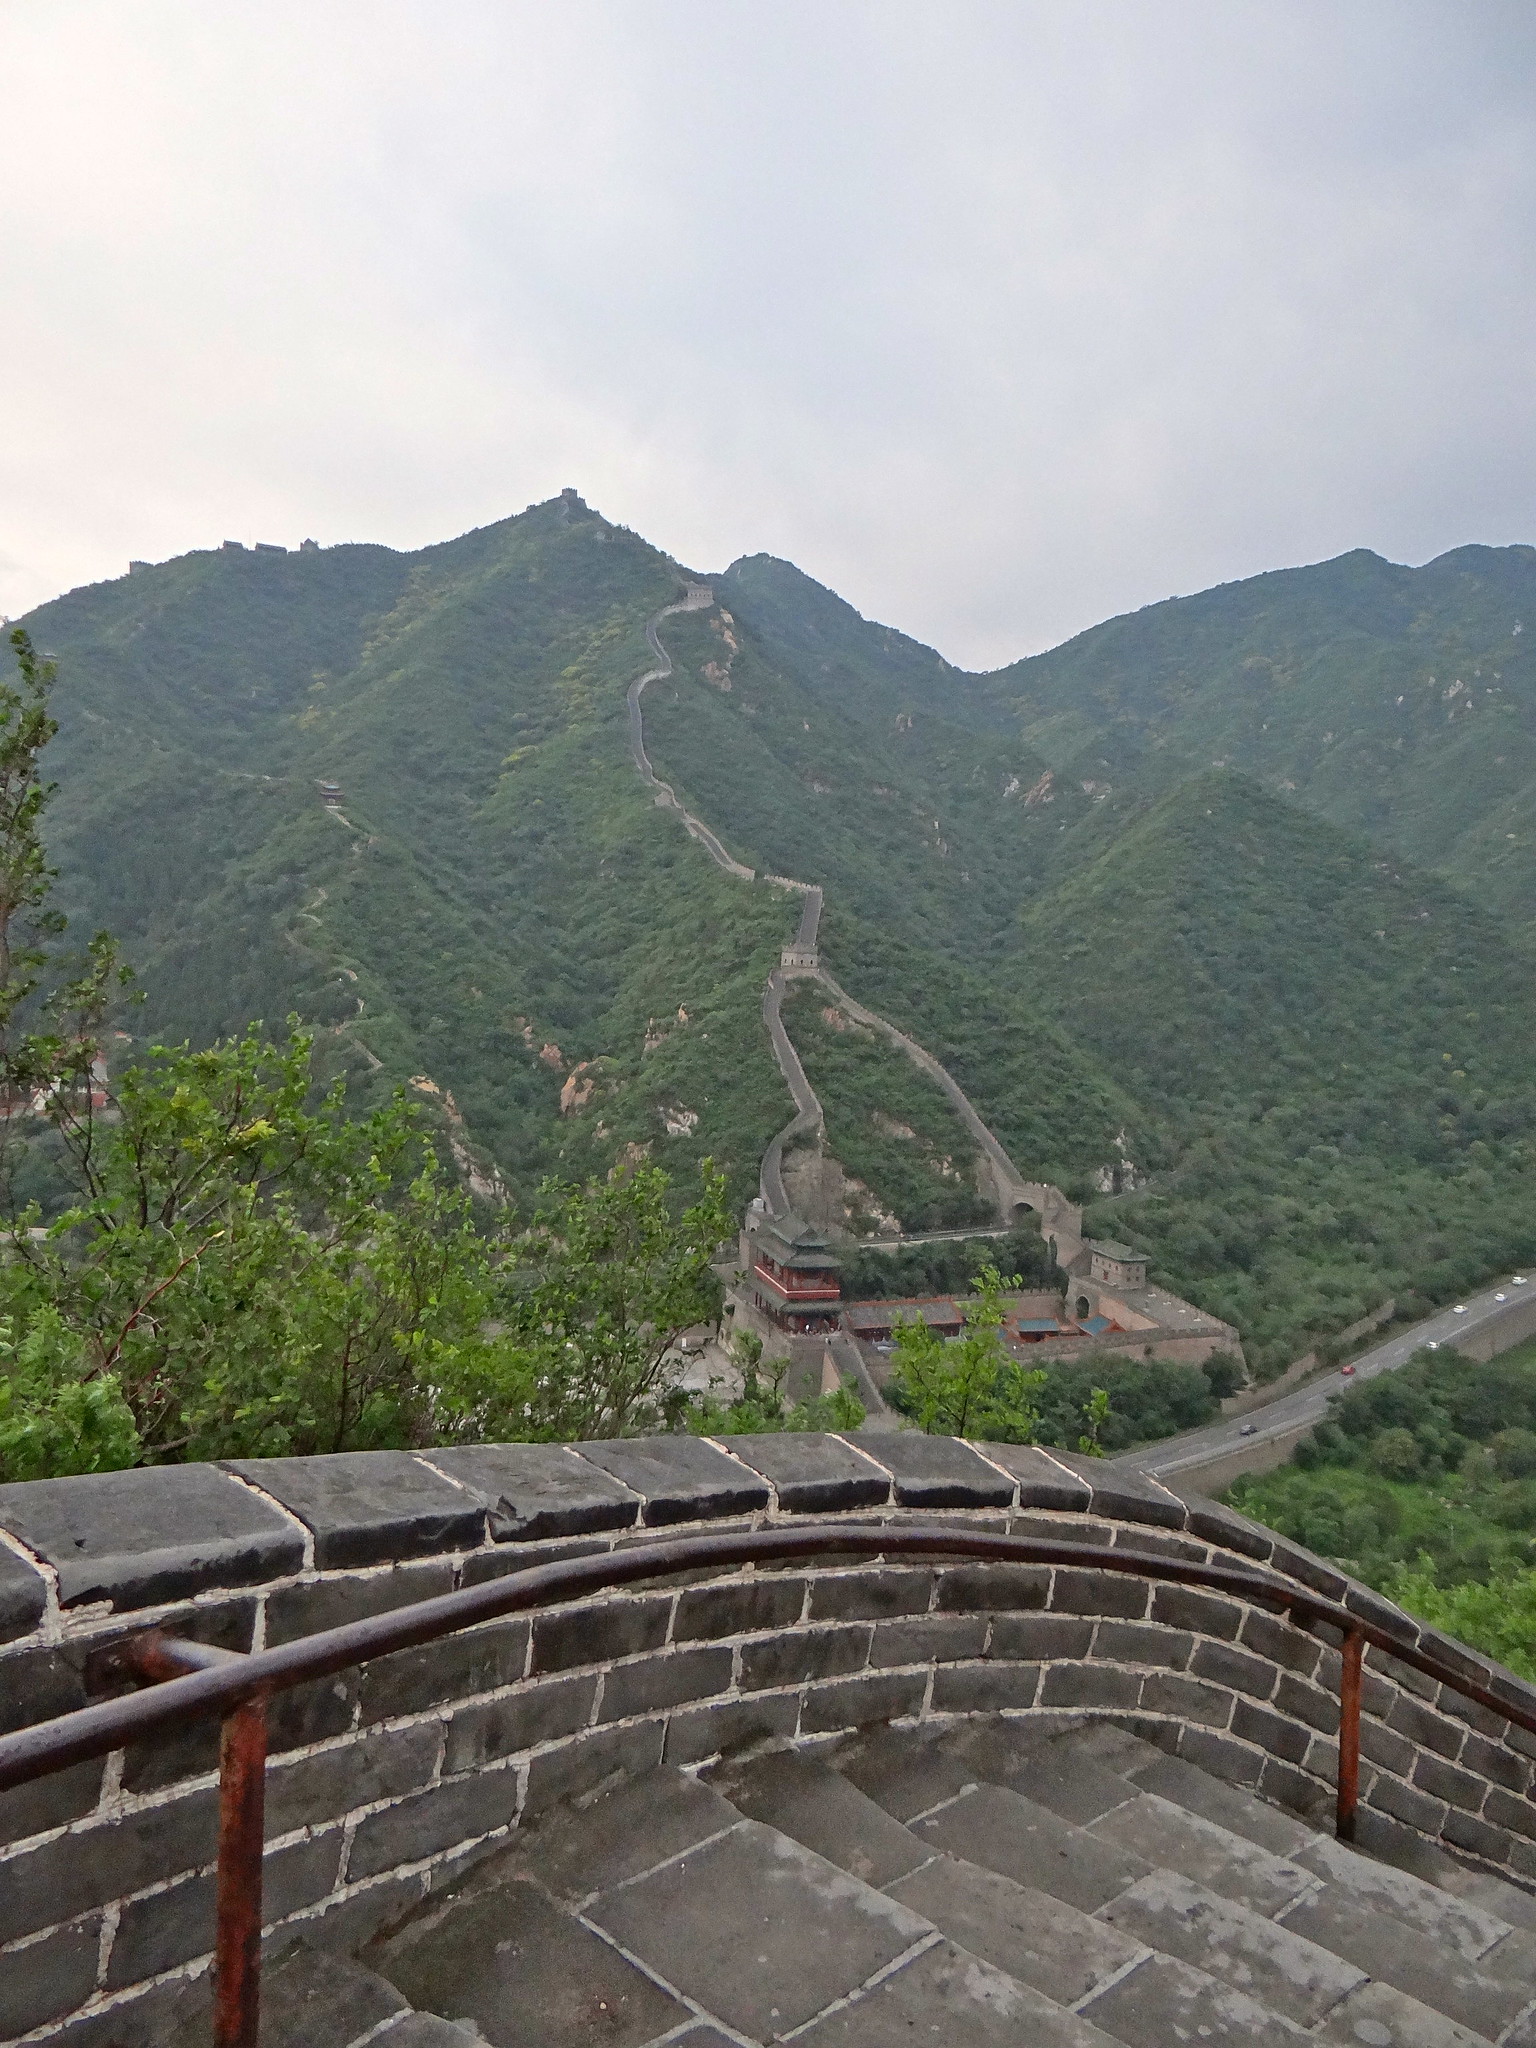 Atop the Great Wall of China